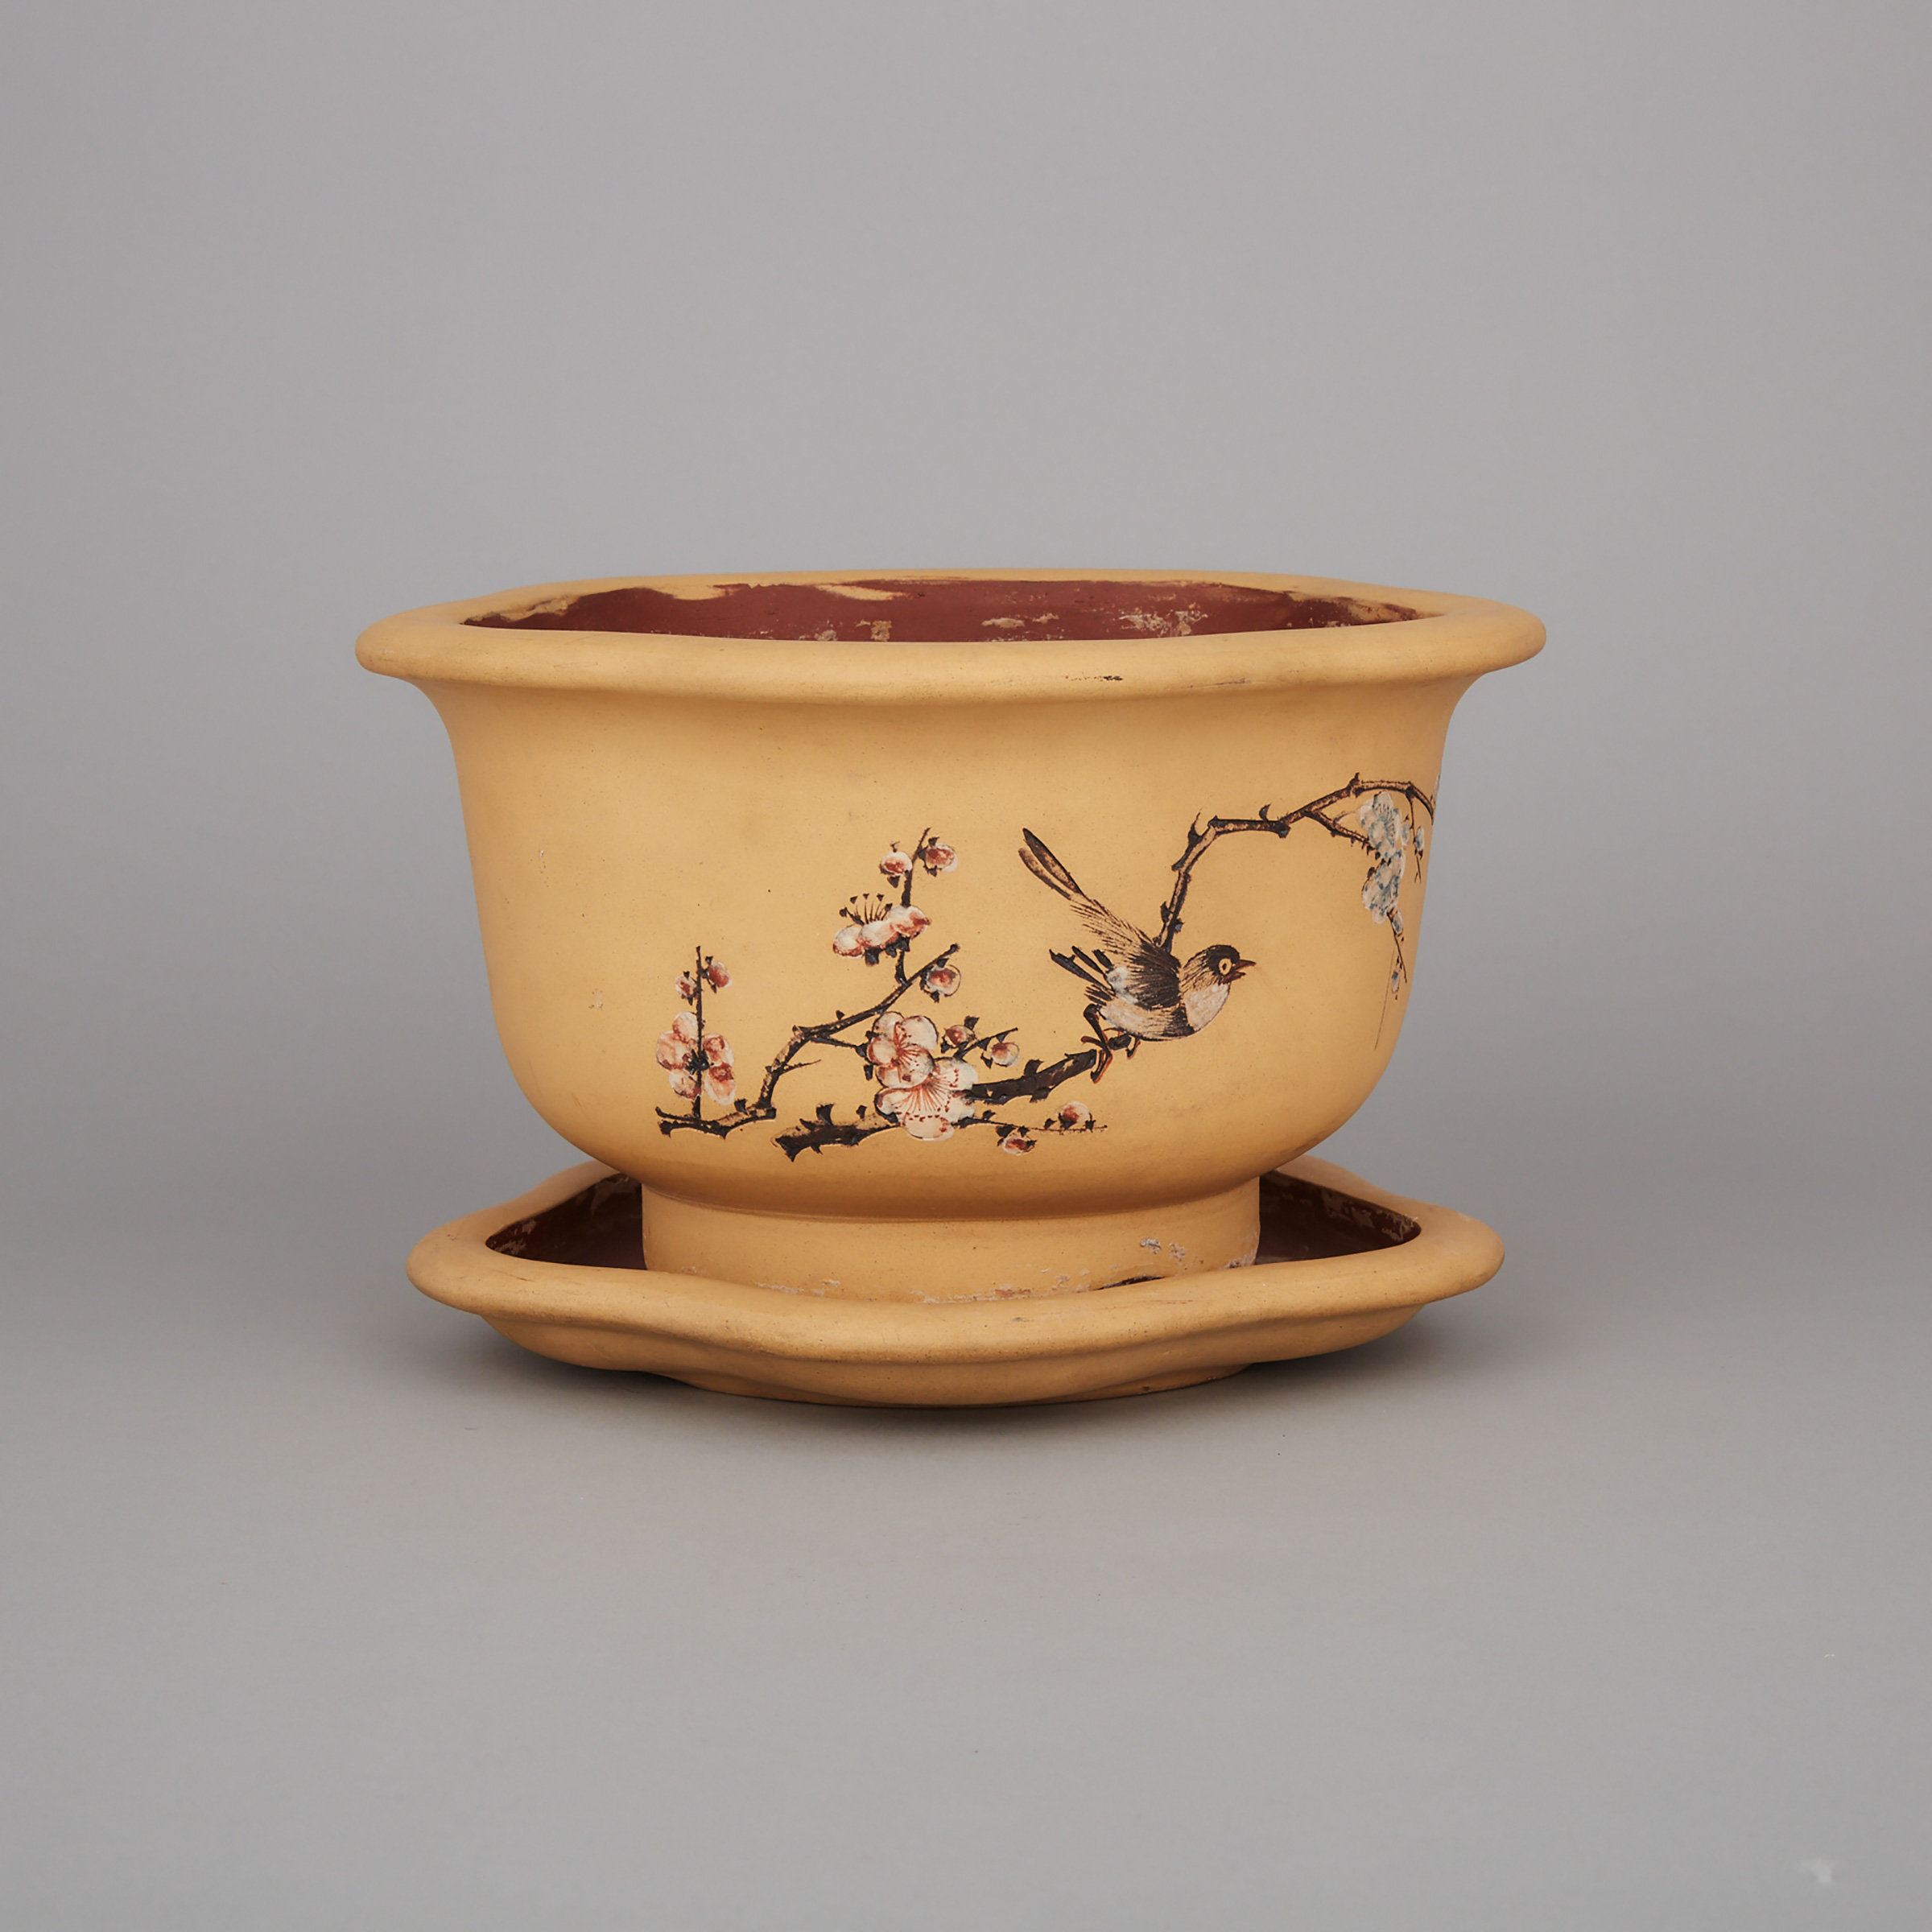 An Inscribed Yixing Stoneware Planter Pot and Stand